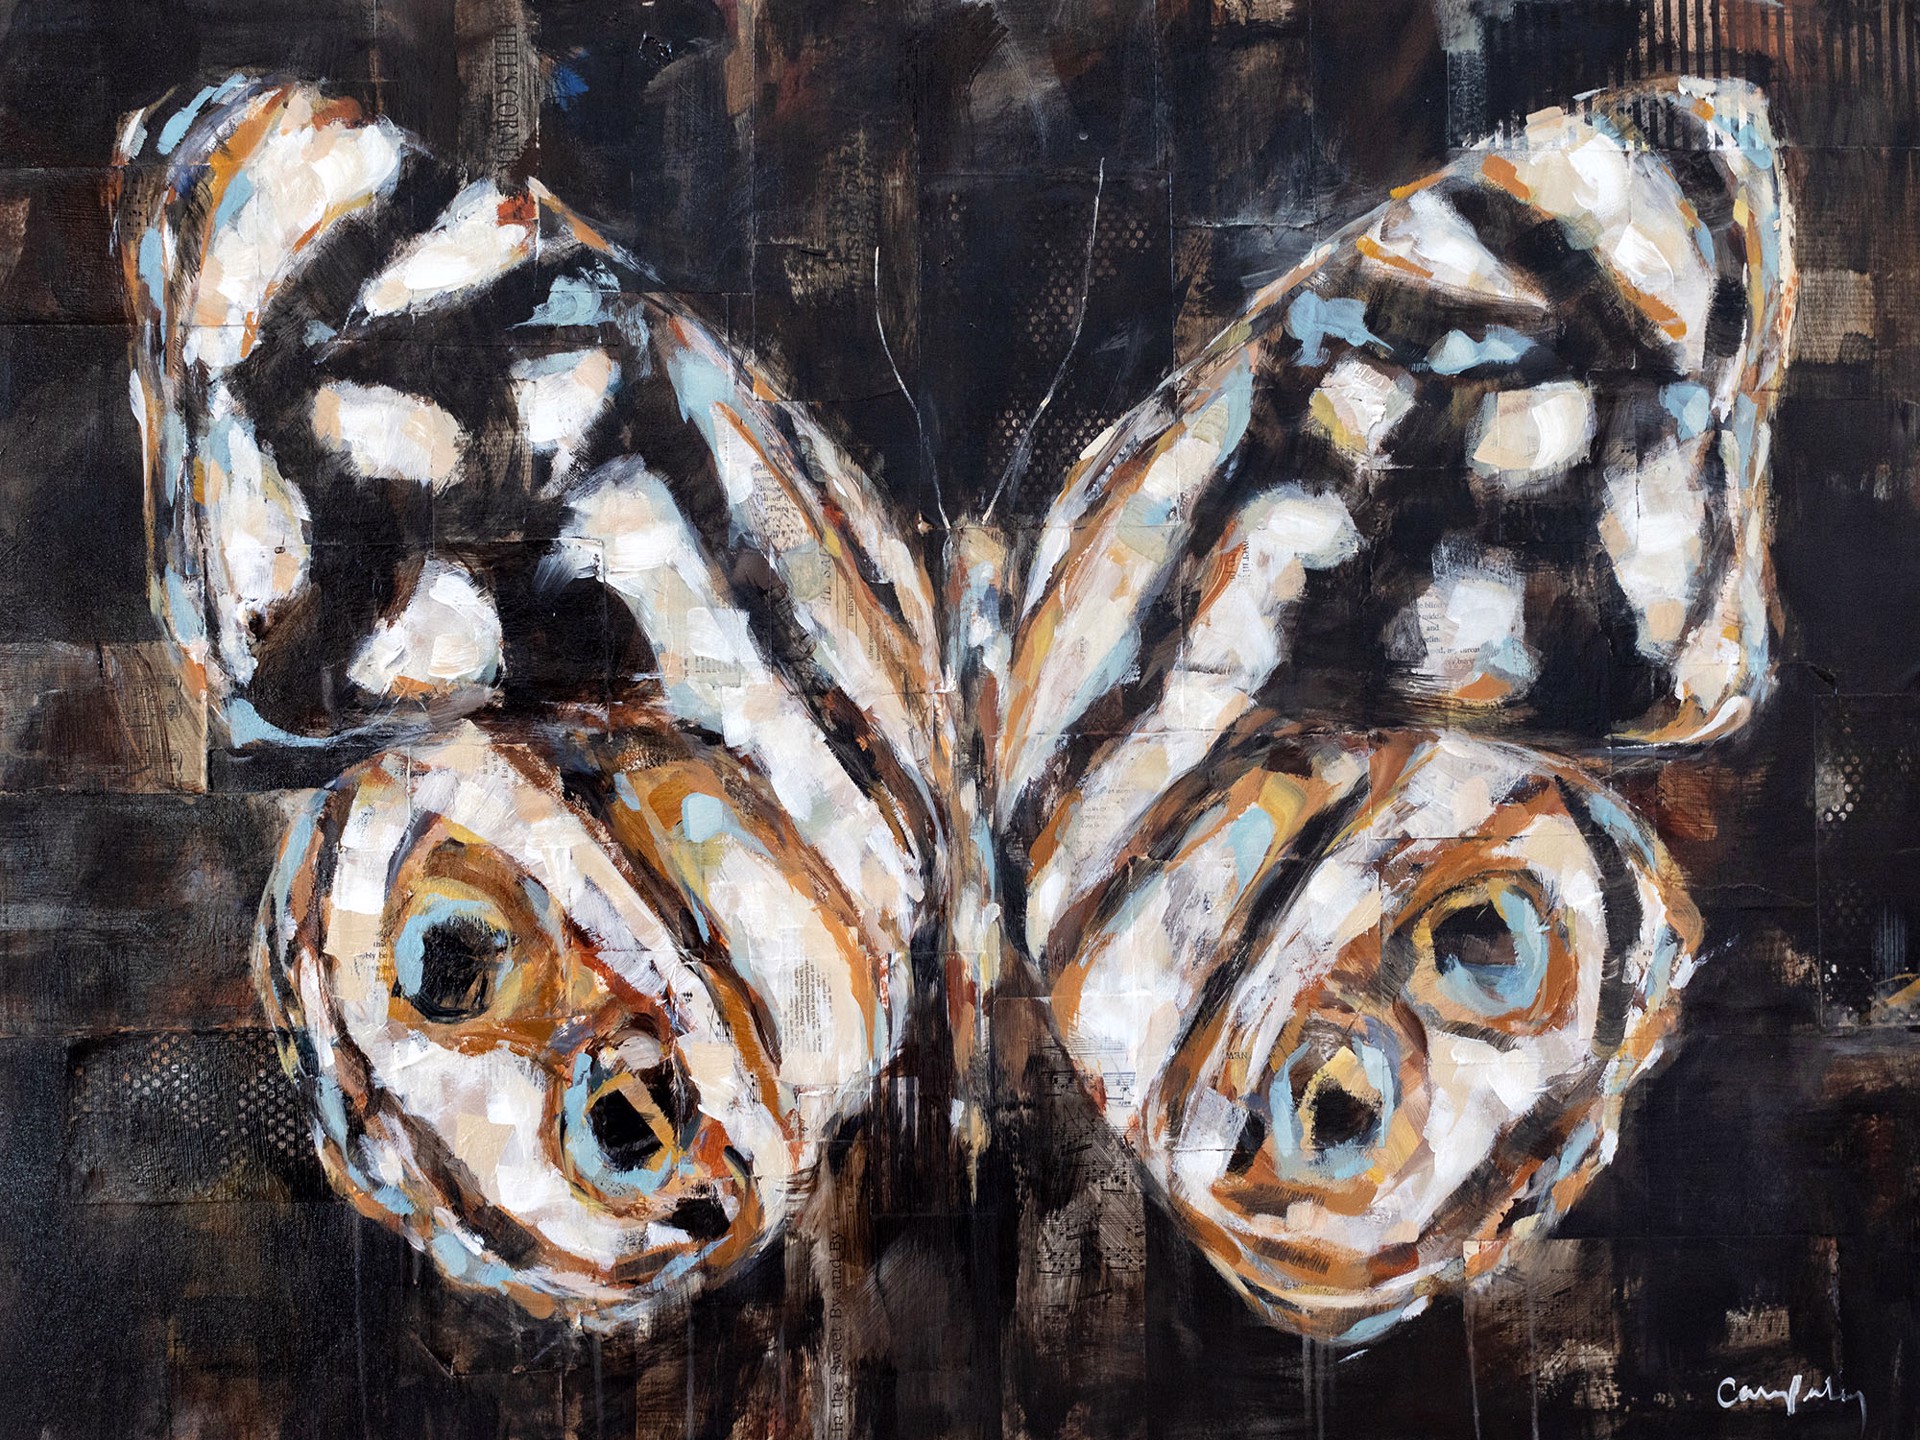 Original Mixed Media Painting By Carrie Penley Featuring A Moth With Collage Elements On Black Background